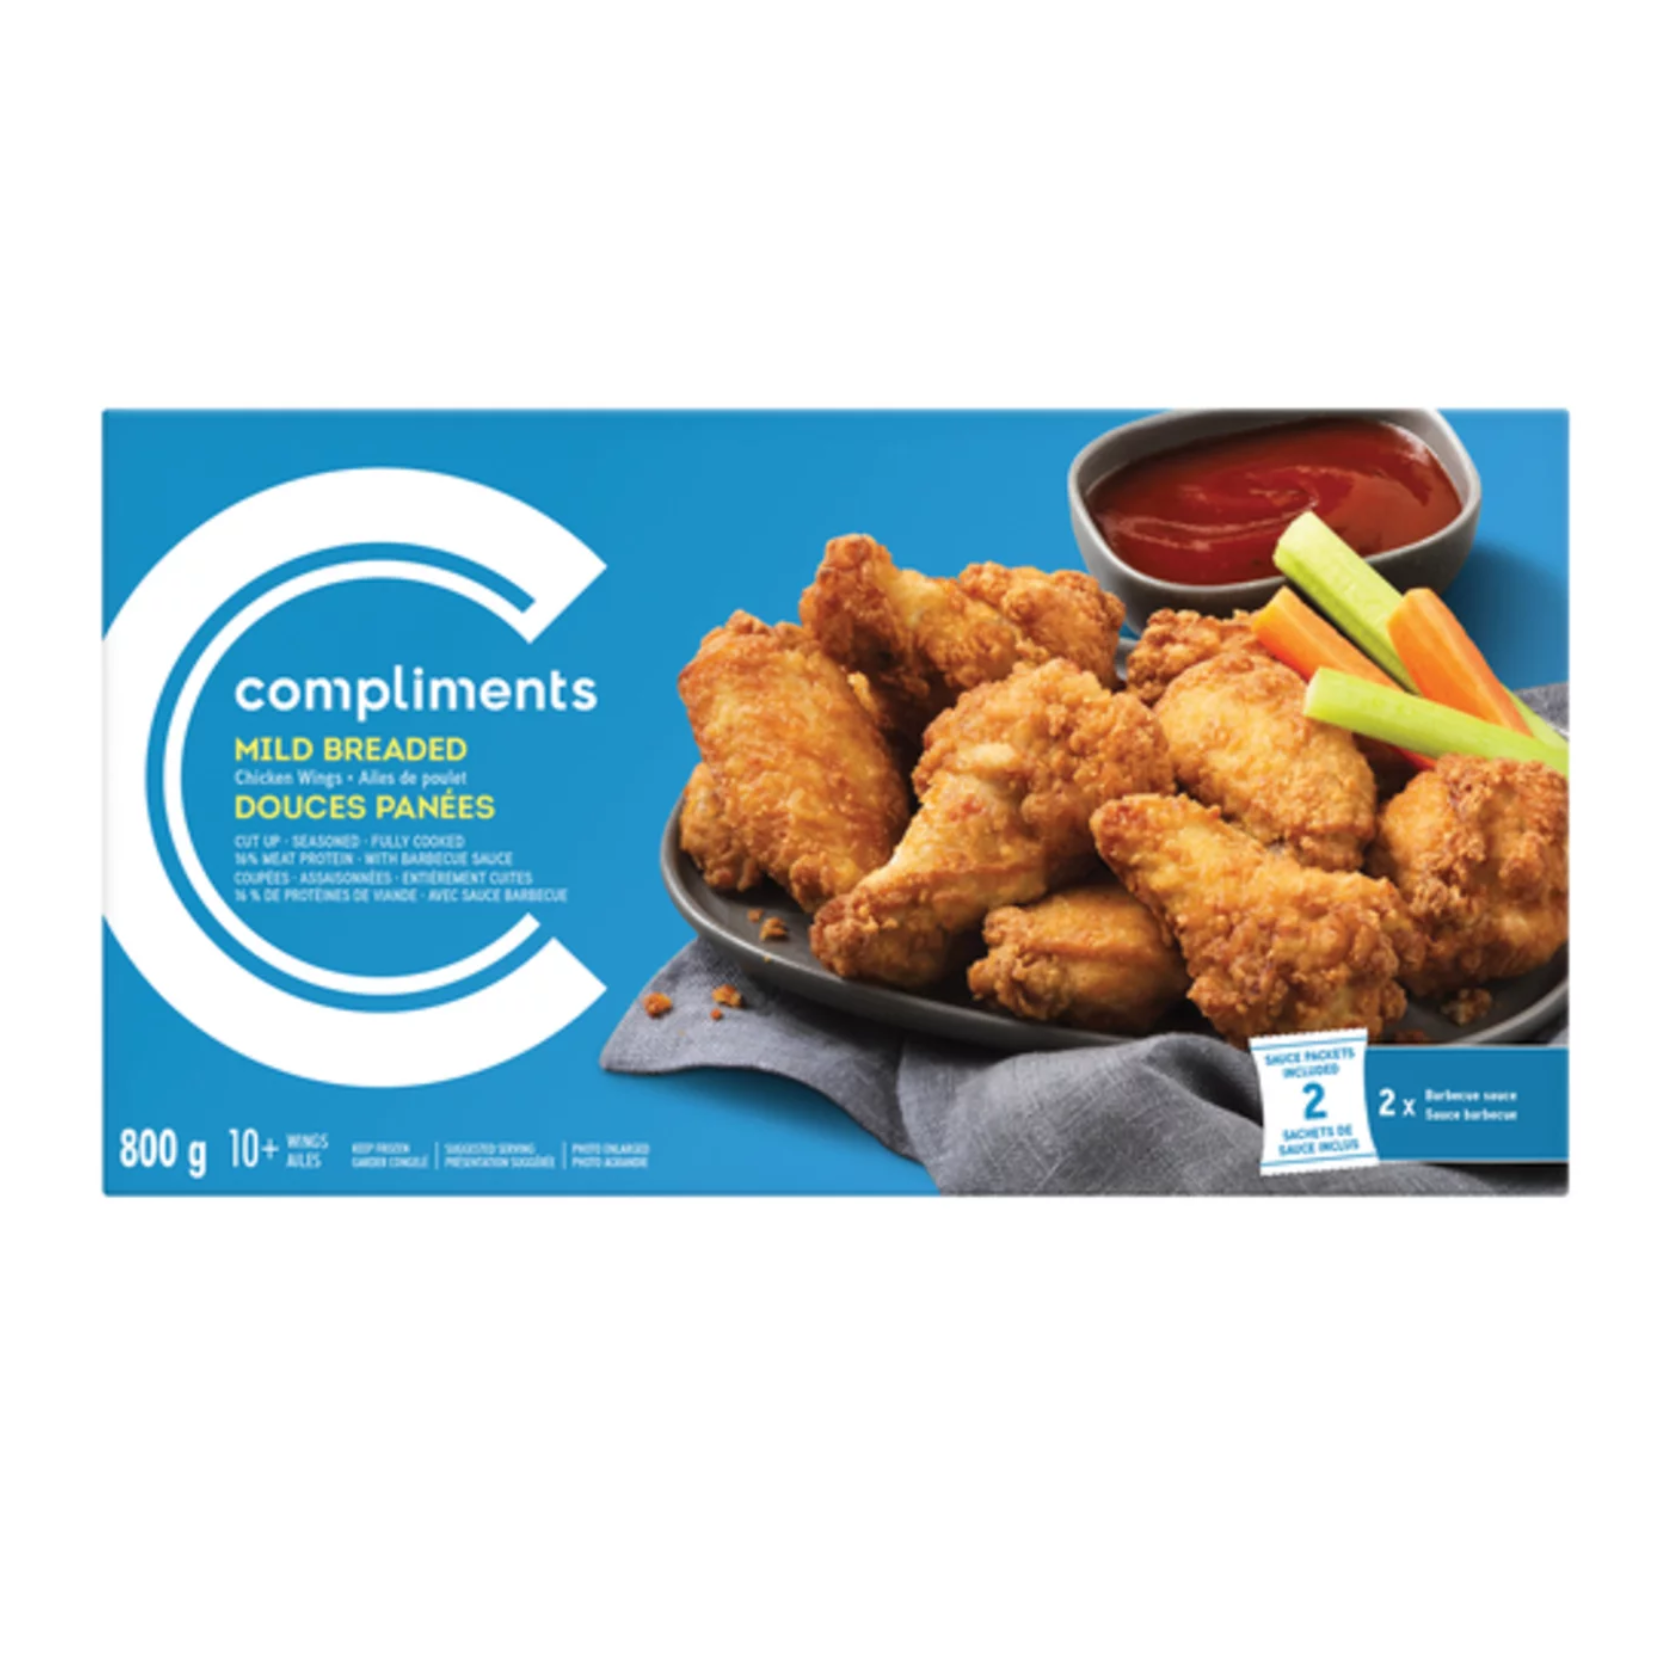 Compliments Mild Breaded Chicken Wings 800g